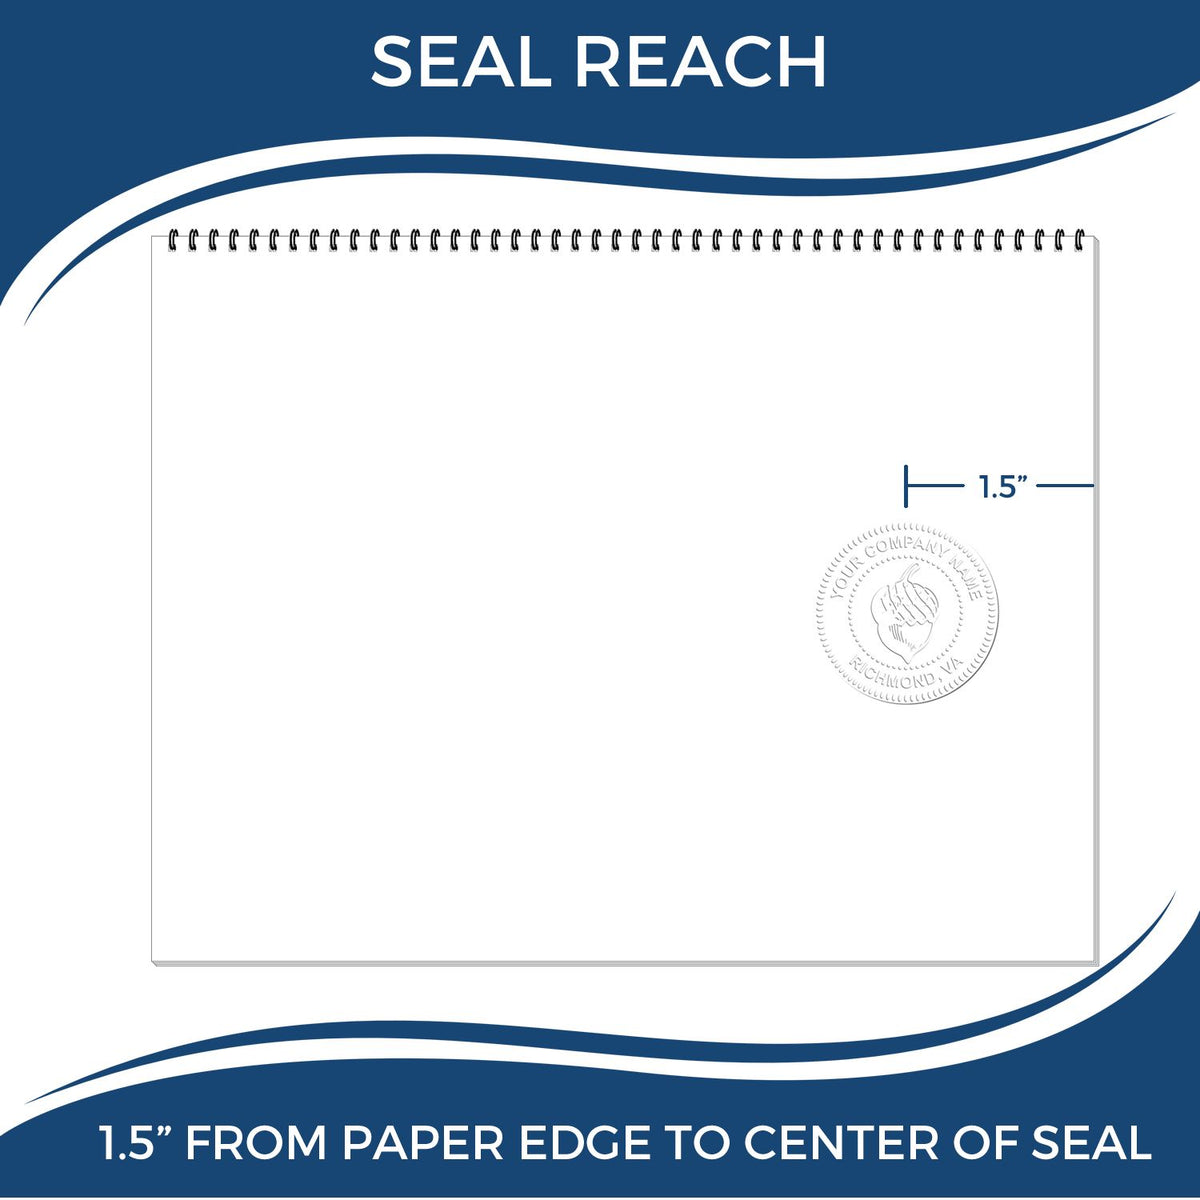 An infographic showing the seal reach which is represented by a ruler and a miniature seal image of the Gift North Carolina Geologist Seal